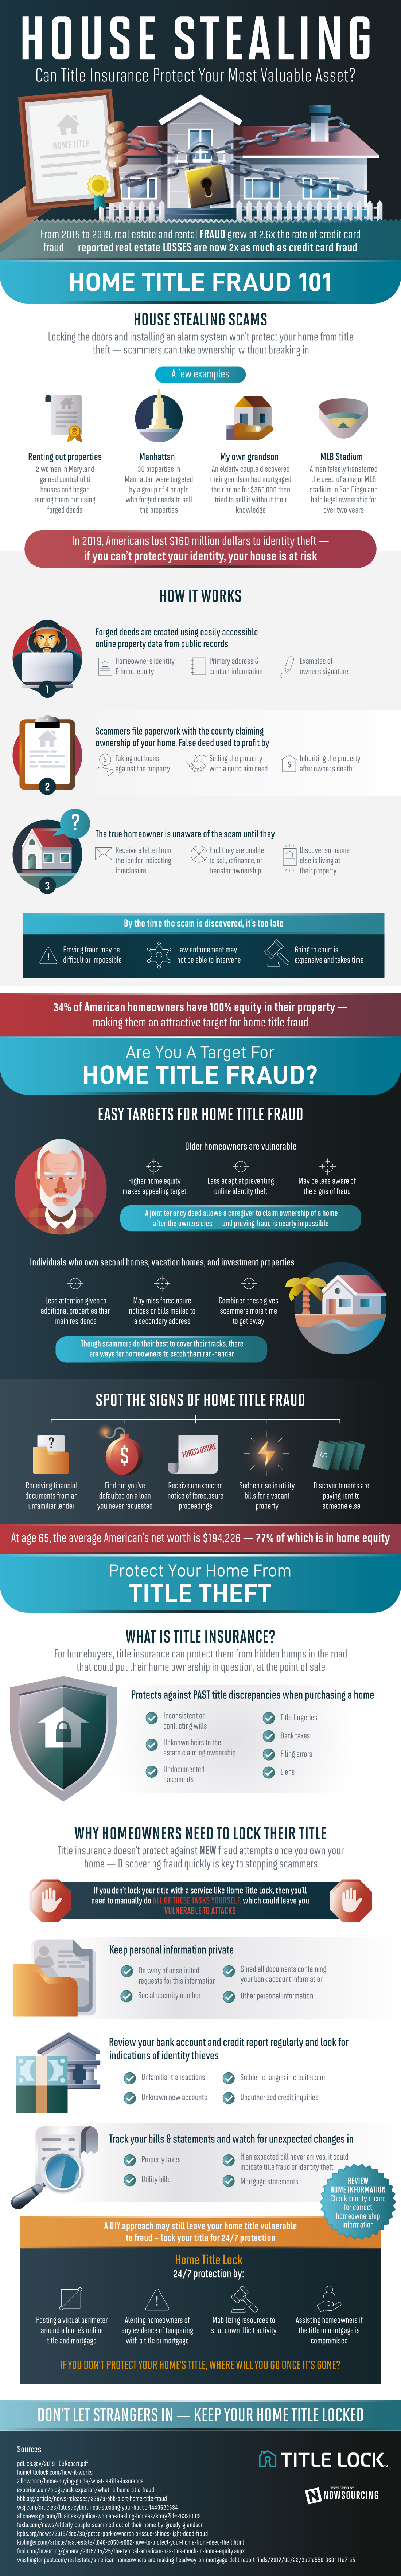 Infographic: Identity theft and home title fraud, know the risks